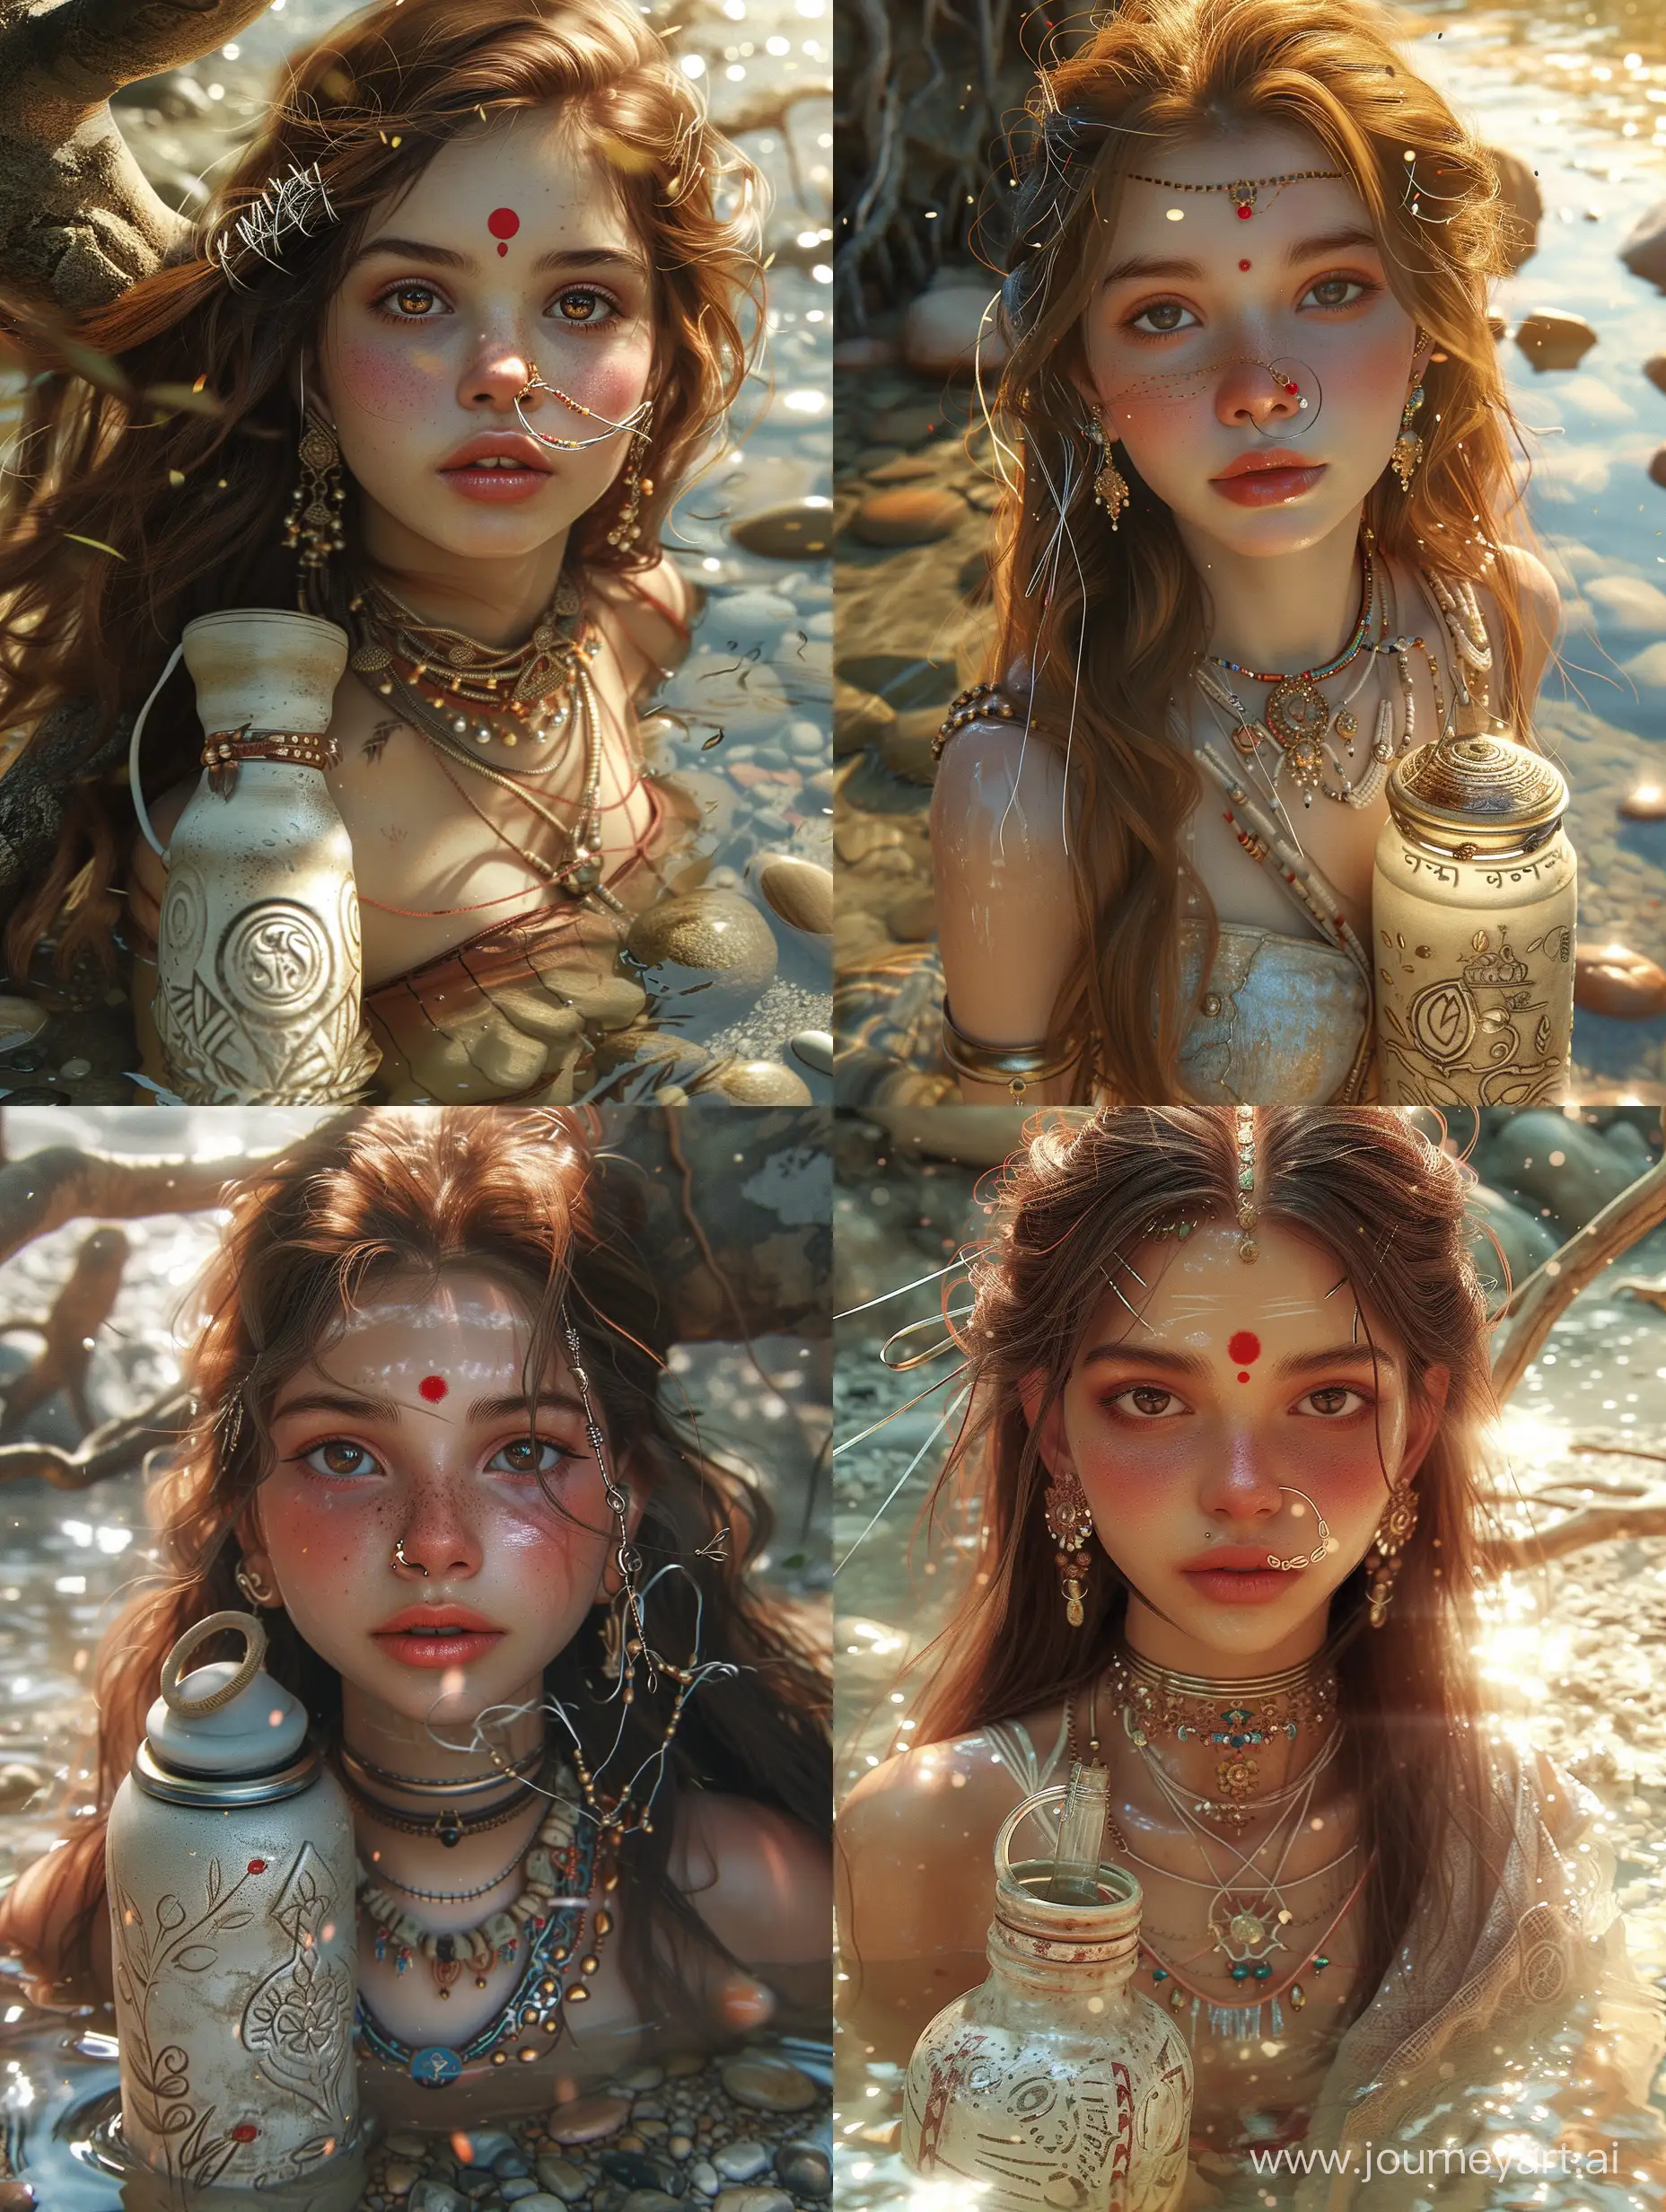 A beautiful 20-year-old Indian girl with rosy cheeks, glossy lips, metal threads woven in her hair, a red mole between her eyebrows, earrings, a detailed nose ring, and a meticulously detailed necklace. She has long chestnut hair, carries a ceramic water bottle with engraved relief, and walks in a clear stream with pebbles and ancient tree roots. Sunlight reflects on her.